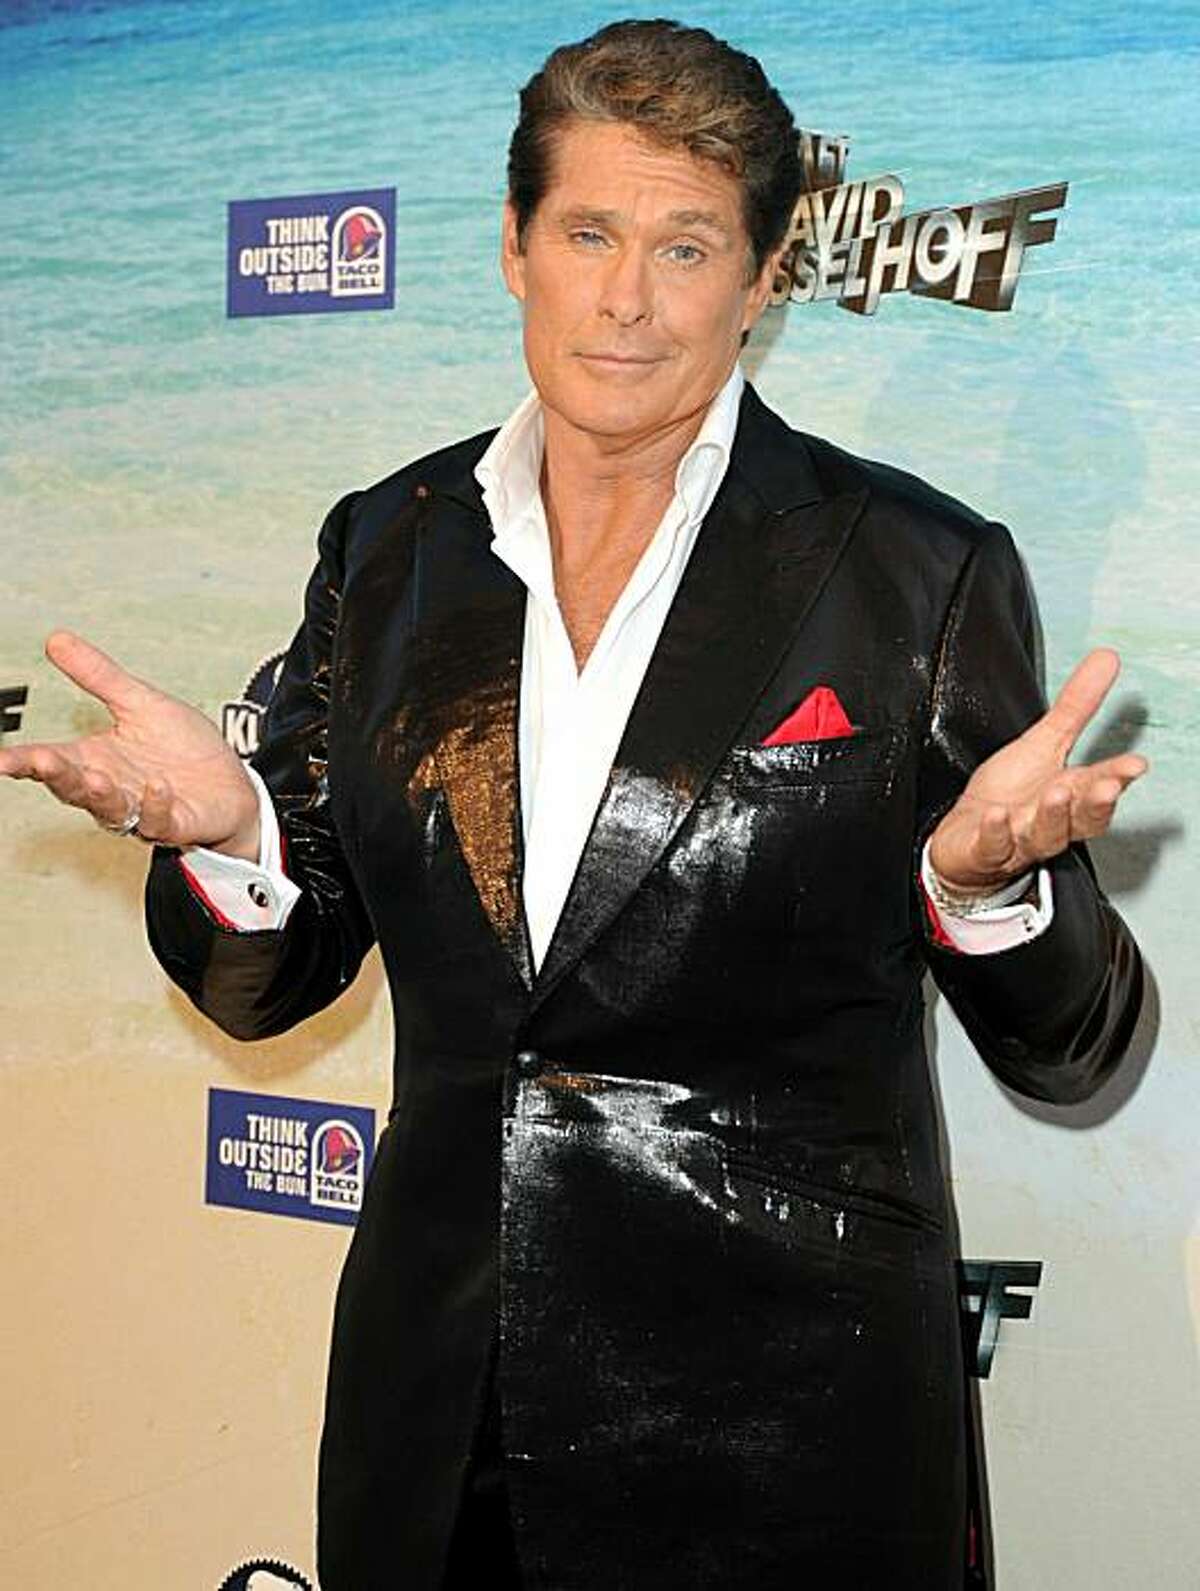 CULVER CITY, CA - AUGUST 01: Actor David Hasselhoff arrives at the Comedy Central Roast Of David Hasselhoff held at Sony Pictures Studios on August 1, 2010 in Culver City, California. The "Comedy Central Roast of David Hasselhoff" will air on Sunday, August 15, 2010 at 10:00 p.m. ET/PT.